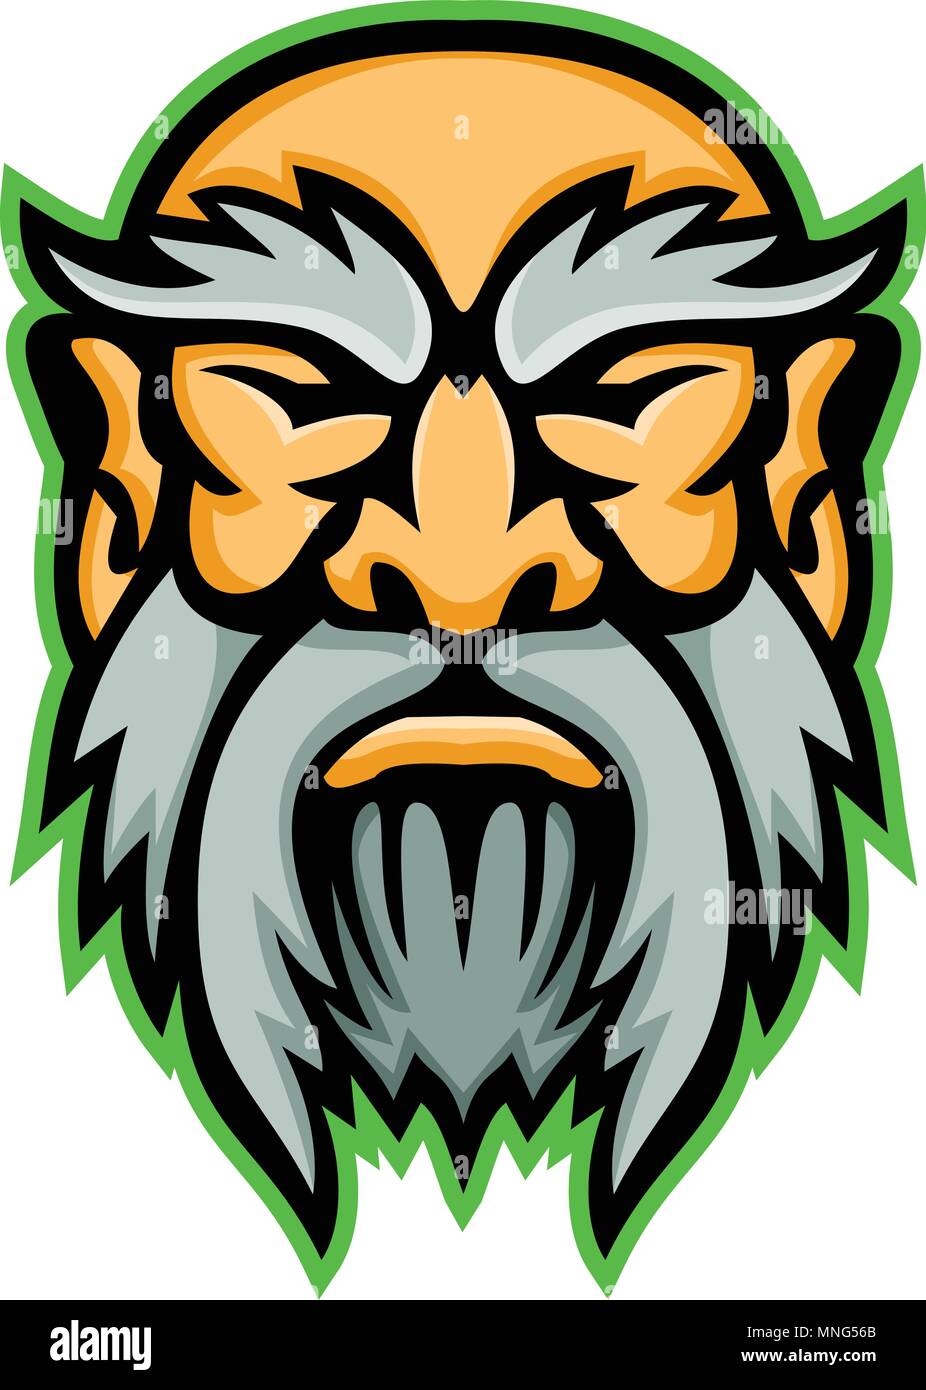 Mascot icon illustration of head of Cronus or Kronos, a son of Uranus and Ge, and the youngest among the Titans and Greek mythology god viewed from fr Stock Vector